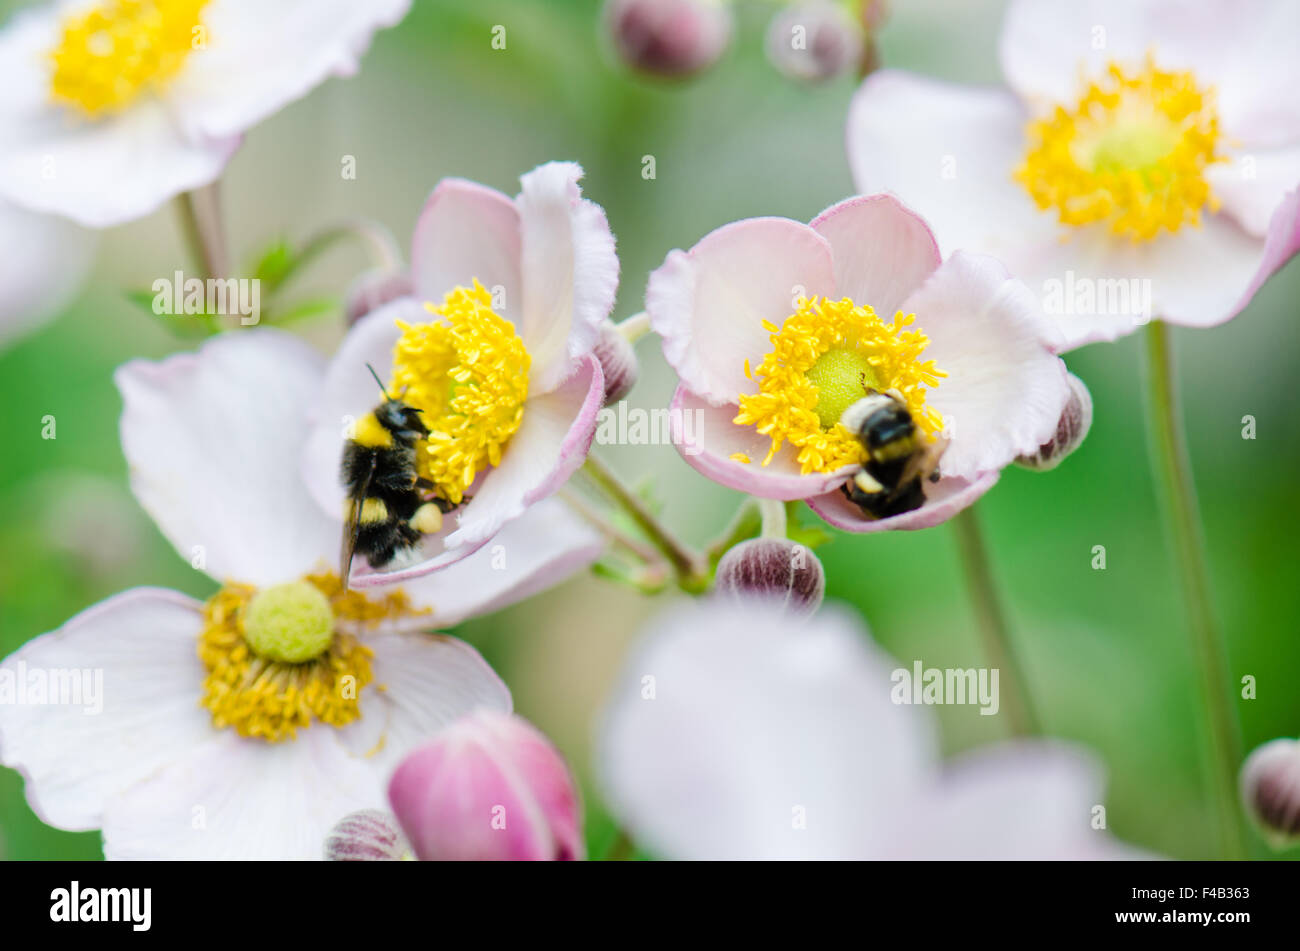 a bee collects pollen from flower, close-up Stock Photo